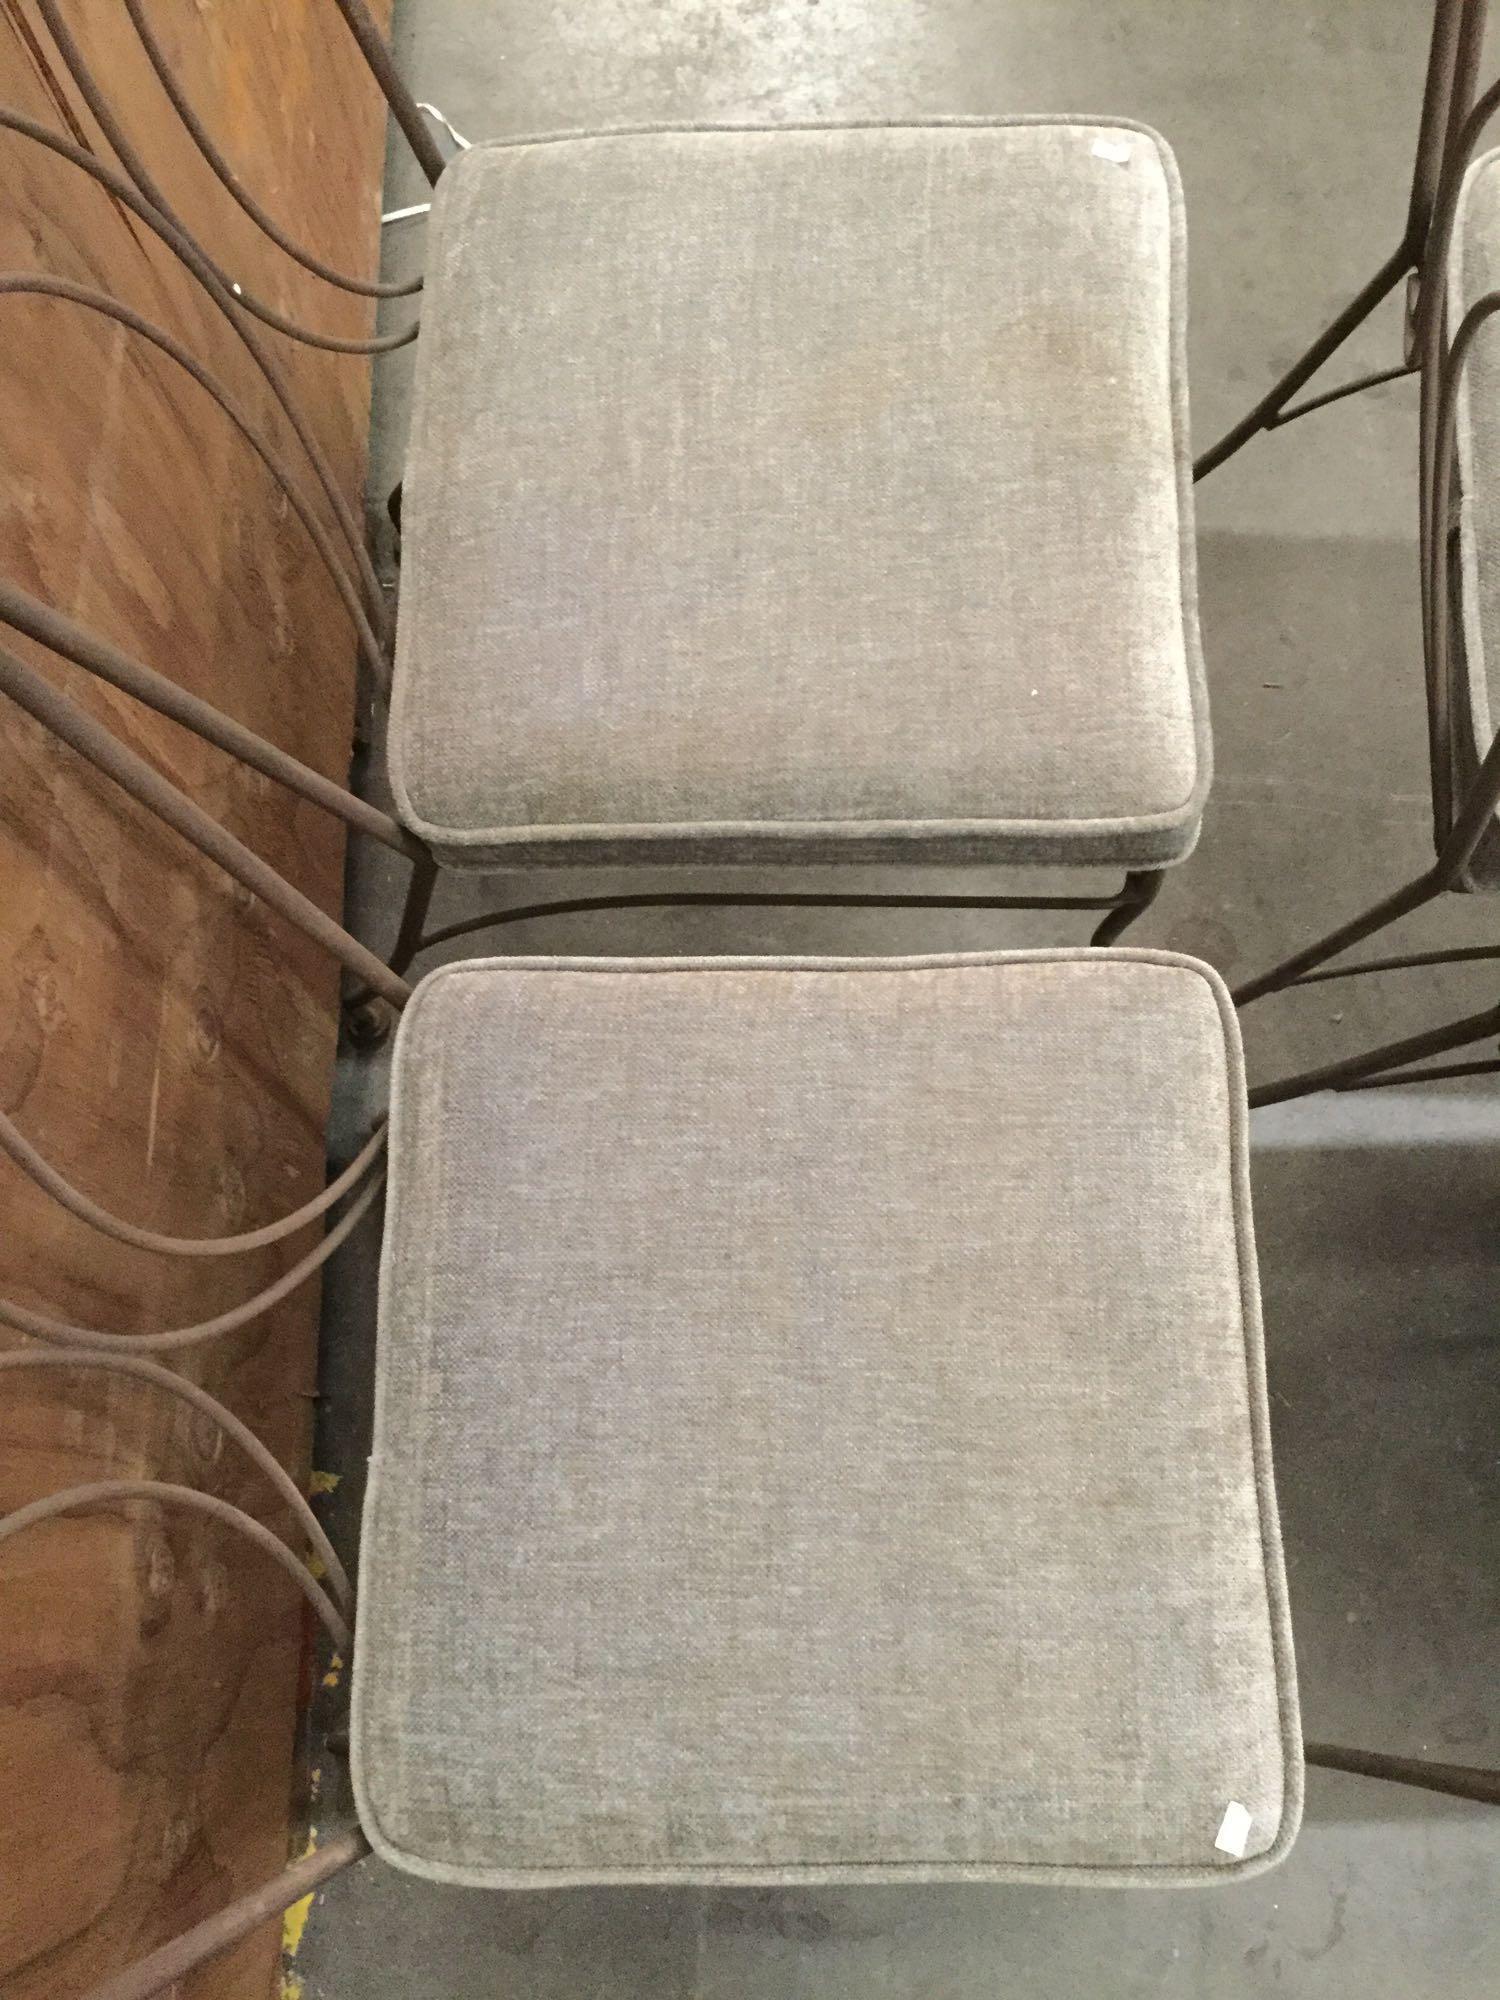 Set of 4 metal frame upholstered dining chairs. Approx 33x23x19 inches.